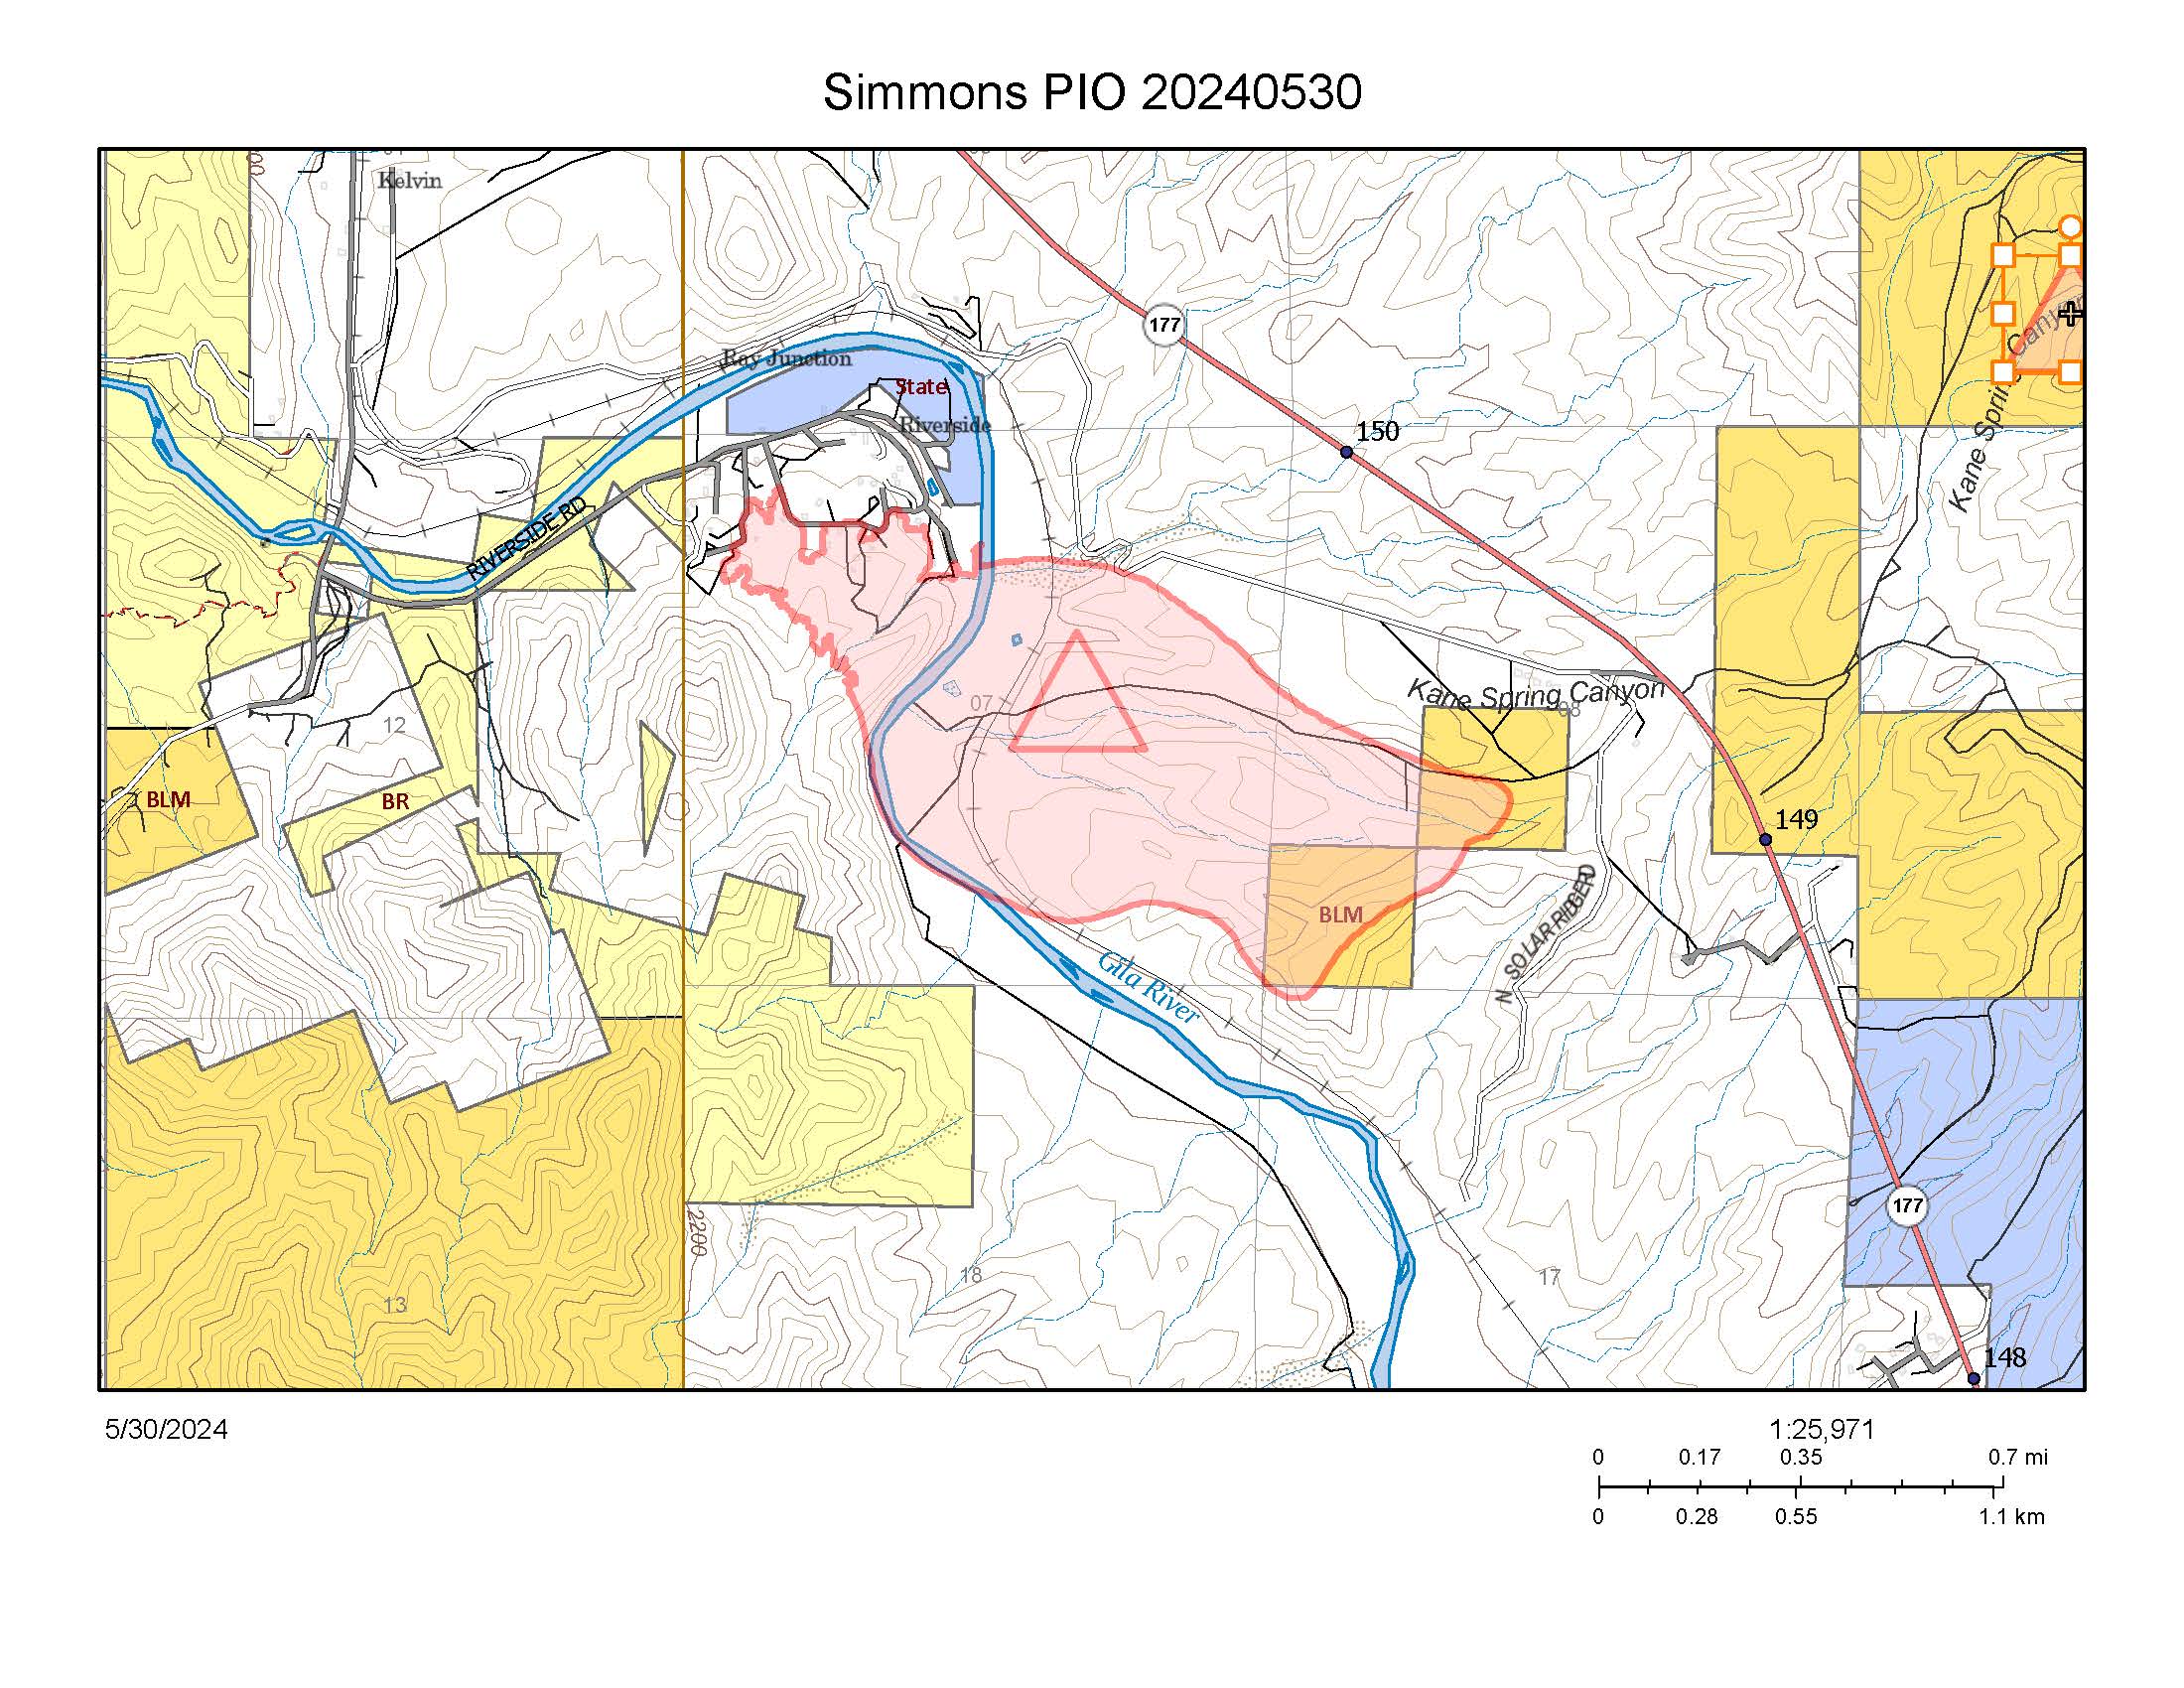 This is a map of the Simmons fire on May 30 2024